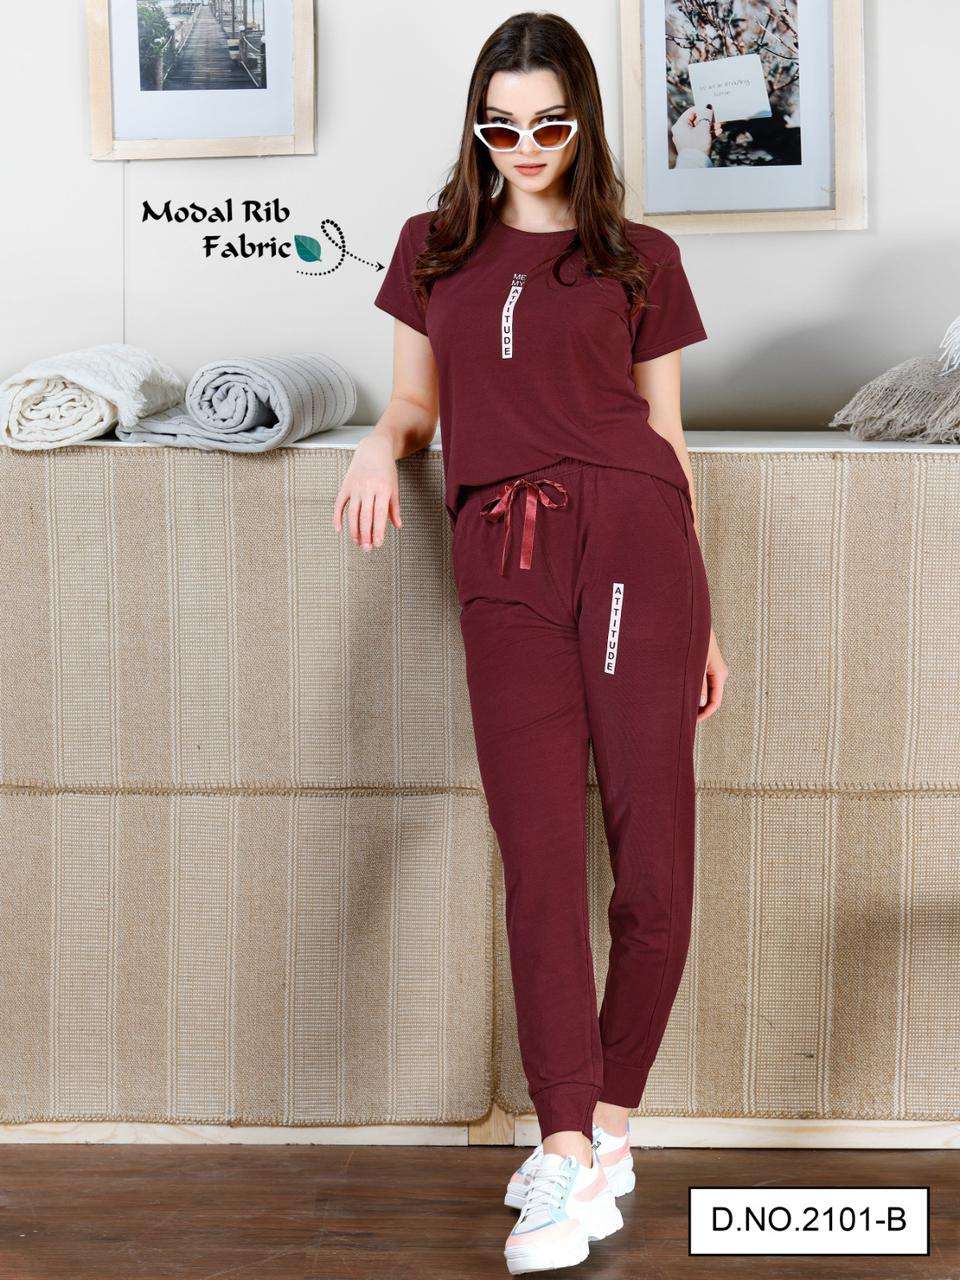 permium-mermaid-nightsuit-collection-girlish-stylish-coord-set-for-nightwear -and-sports-wear-girls-and-womens-stylish-tshirt-and-pyjama-coord-set- nightsuit